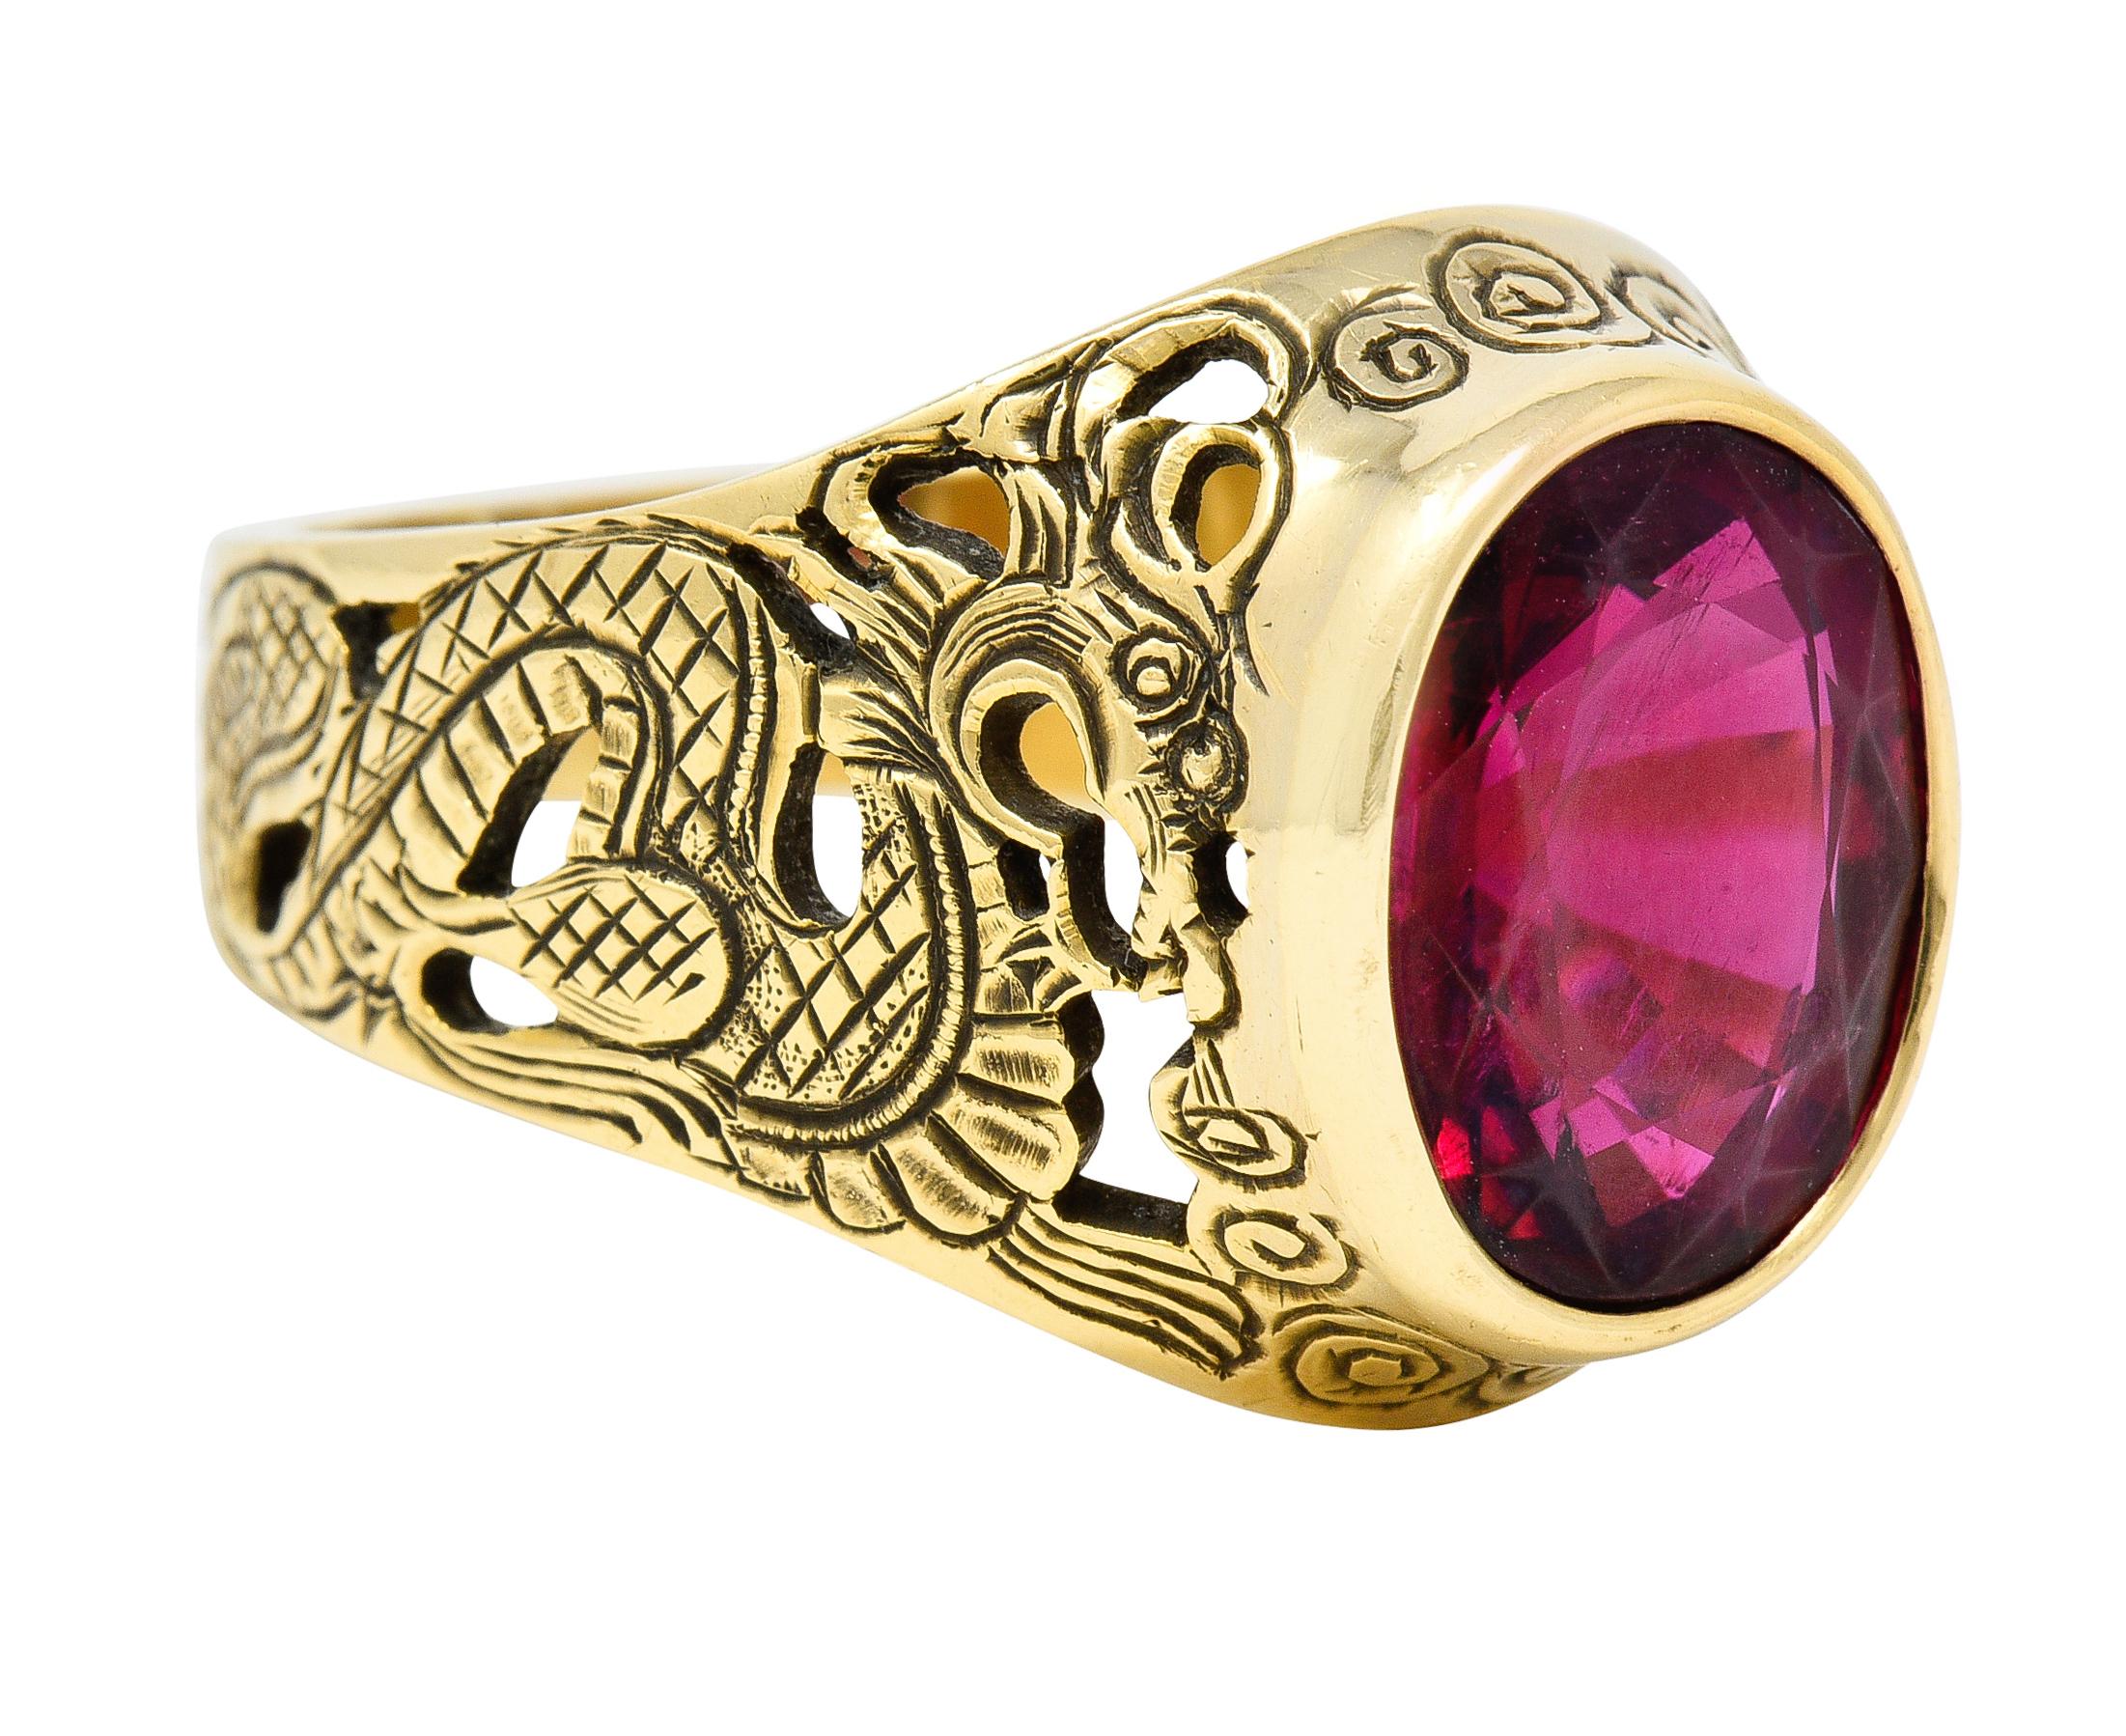 Centering an oval cut rubellite weighing approximately 7.85 carats total. Transparent medium purplish red in color and bezel set. Flanked by ornate pierced dragon motif shoulders. Engraved with texturous scales, tail, and smoke. Stamped 18k for 18